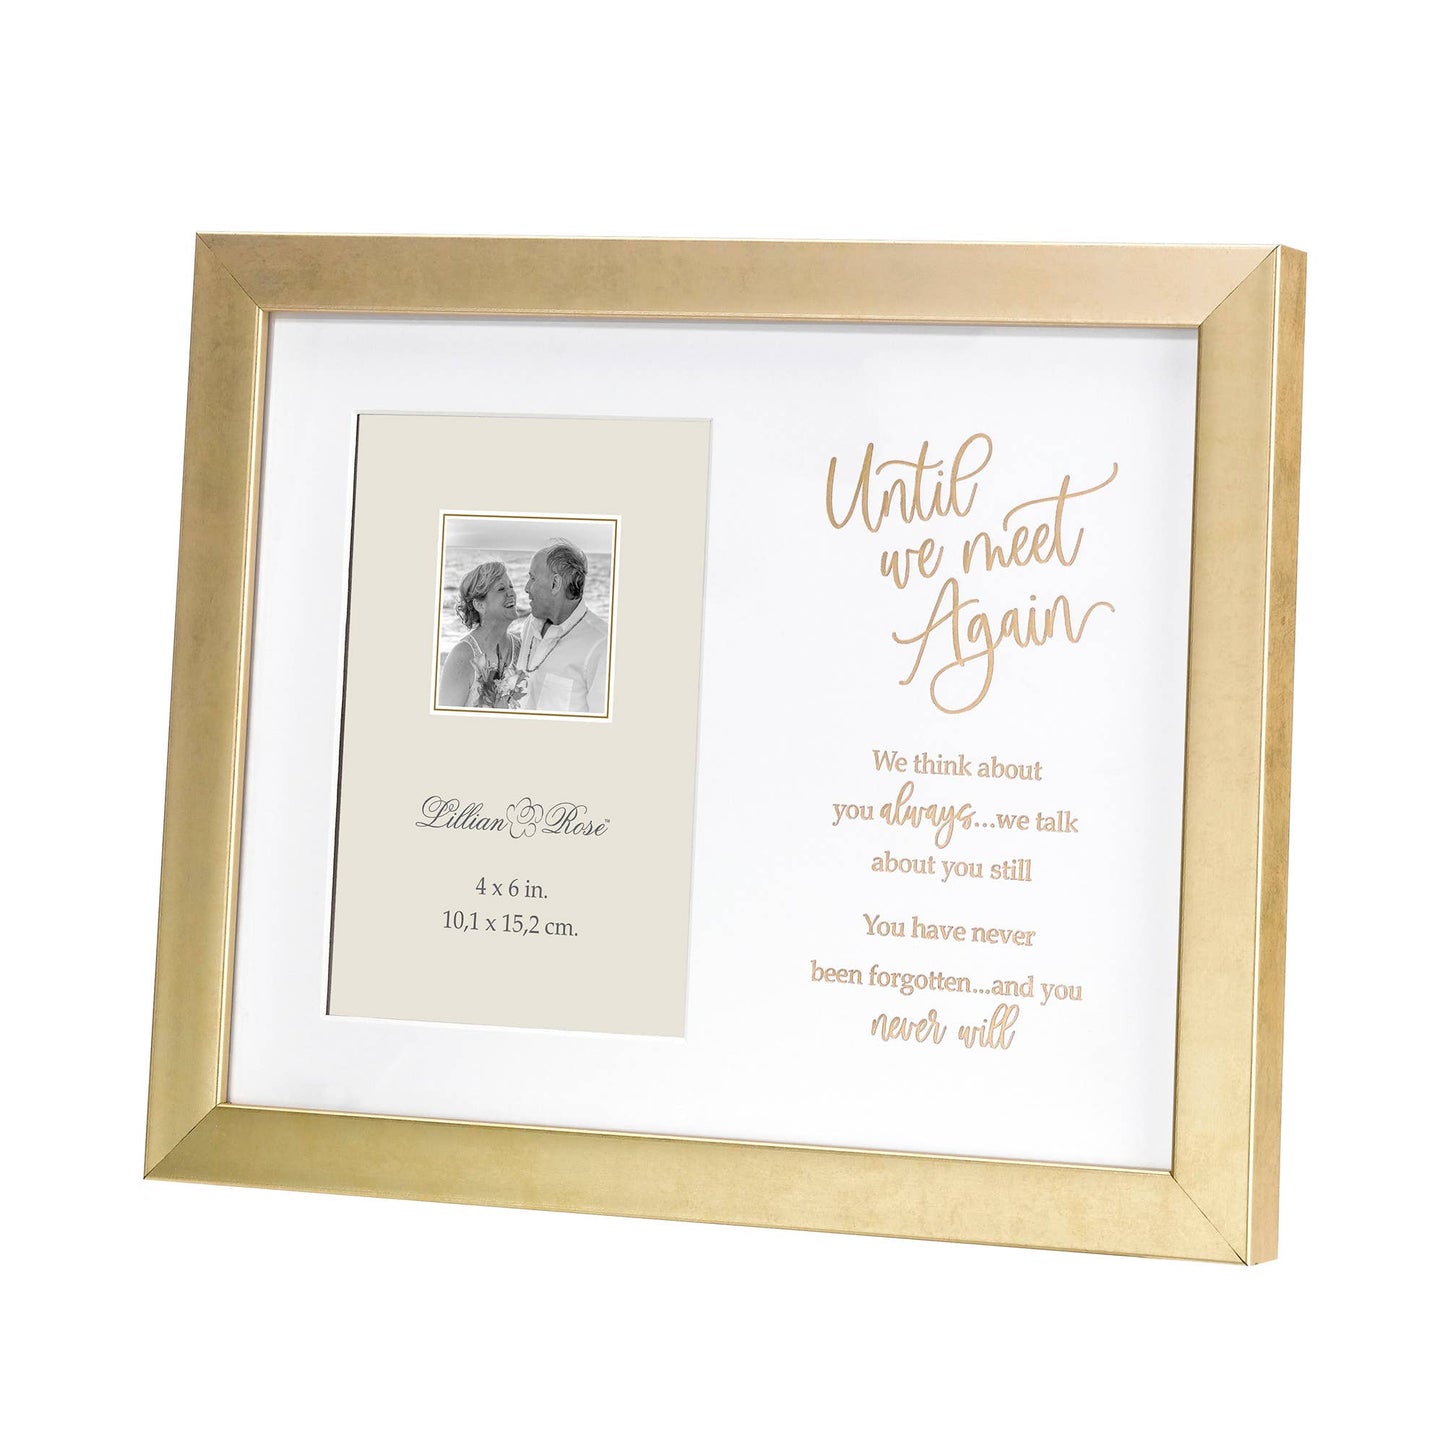 Lillian Rose Memorial Gold Photo Frame with Sympathy Verse